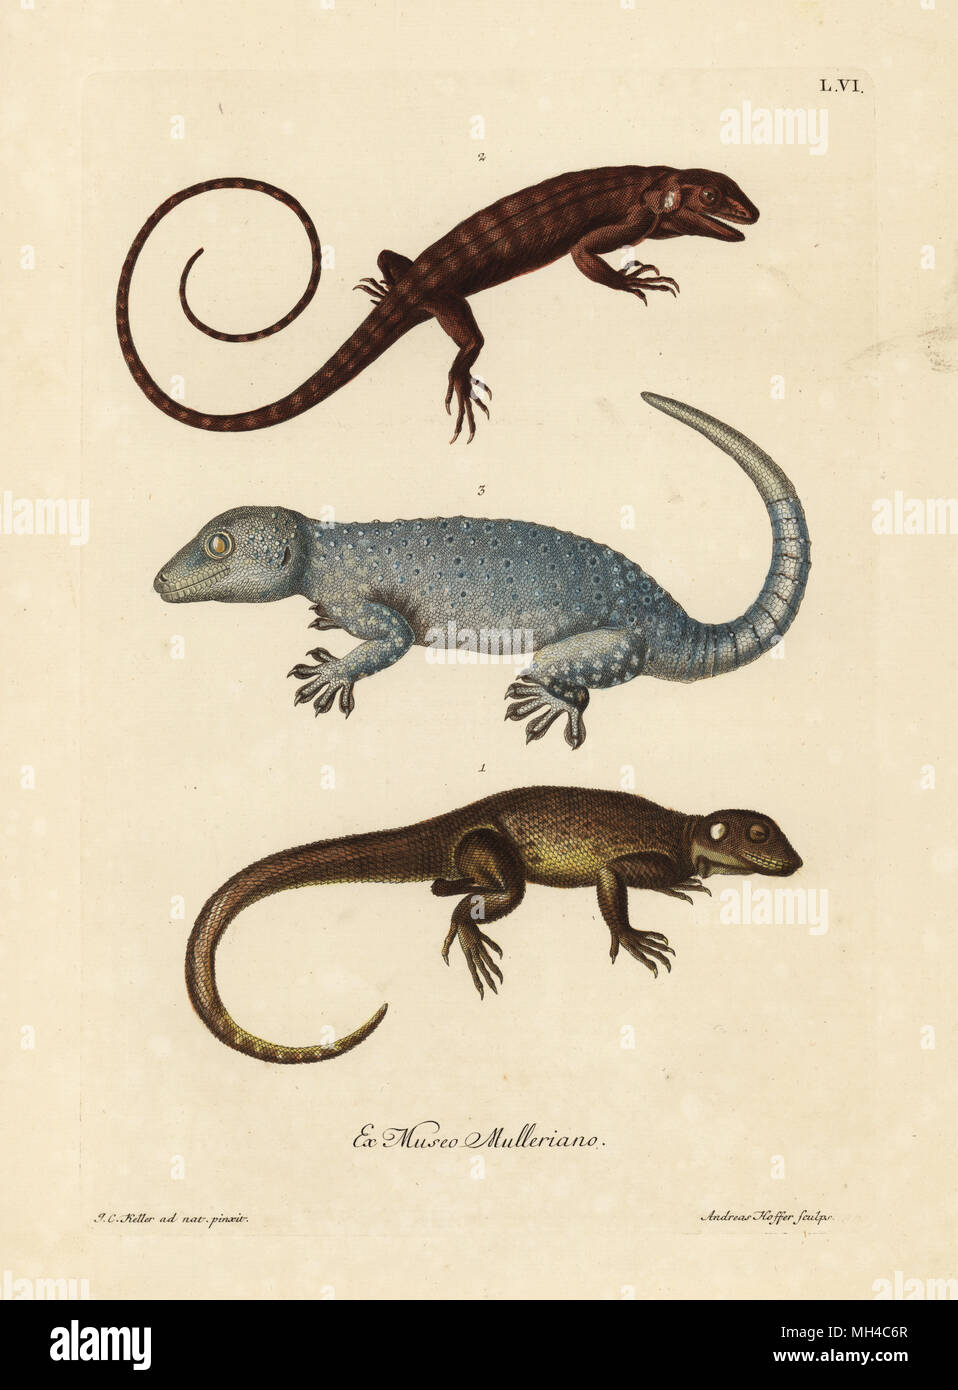 Two species of lizards 1,2 and a gecko 3. Le Lezard gris eguillonne des Indes orientales, le Lezard brun a ecailles rondes des Indes orientales, une Salmandre, Geko. Handcoloured copperplate engraving by Andreas Hoffer after an illustration by Johann Christoph Keller from Georg Wolfgang Knorr's Deliciae Naturae Selectae of Kabinet van Zeldzaamheden der Natuur, Blusse and Son, Nuremberg, 1771. Specimens from a Wunderkammer or Cabinet of Curiosities owned by P.L. Muller. Stock Photo